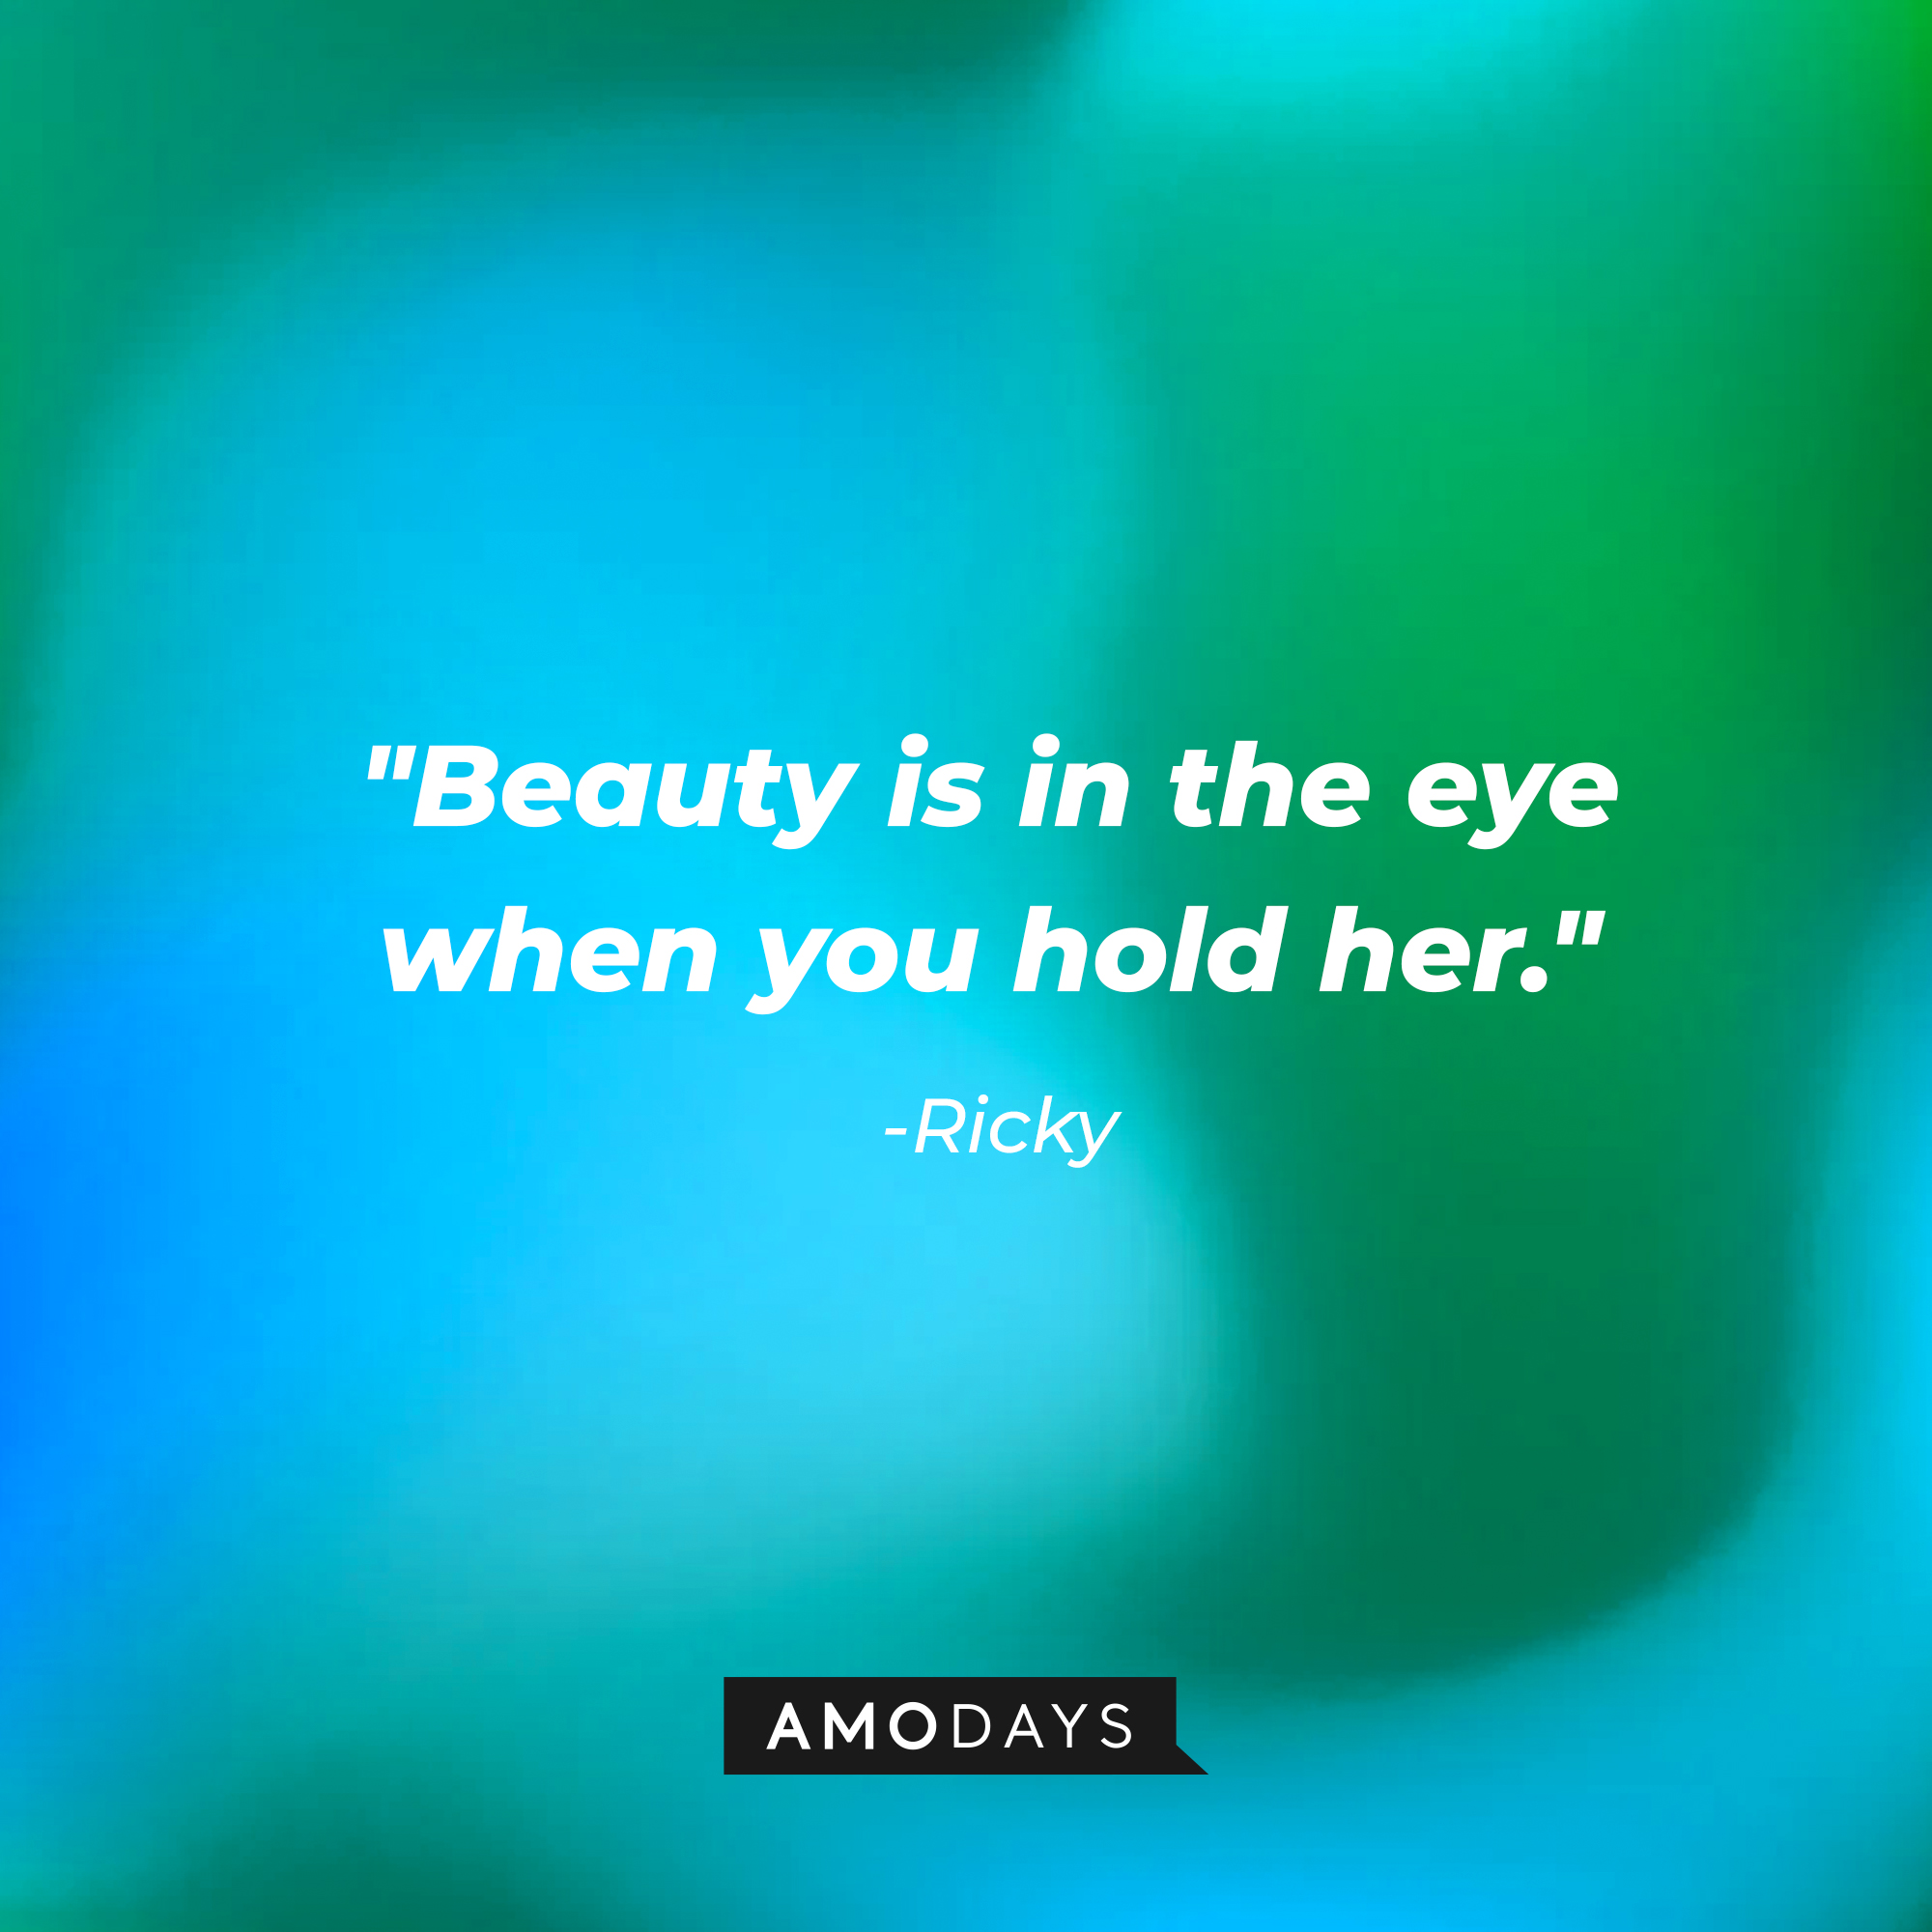 Ricky's quote, "Beauty is in the eye when you hold her." | Source: AmoDays